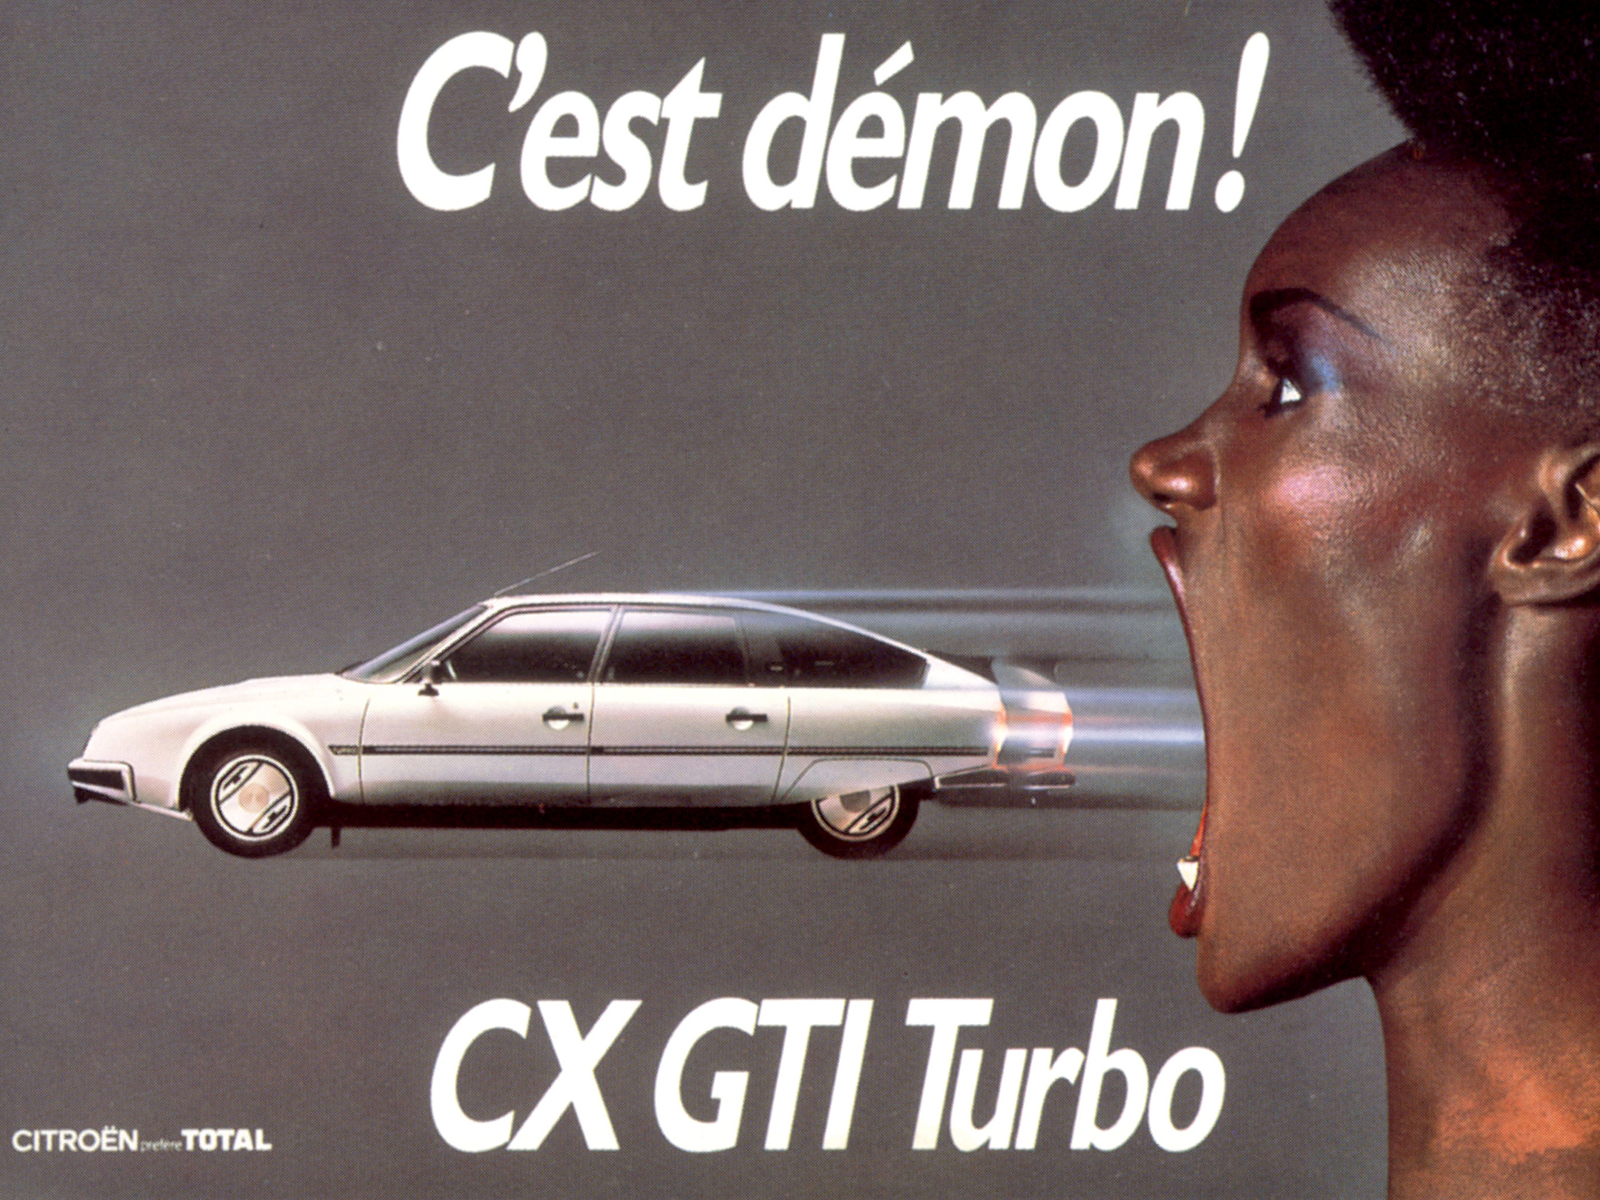 Advertising campaign featuring Grace Jones and a Citroen car